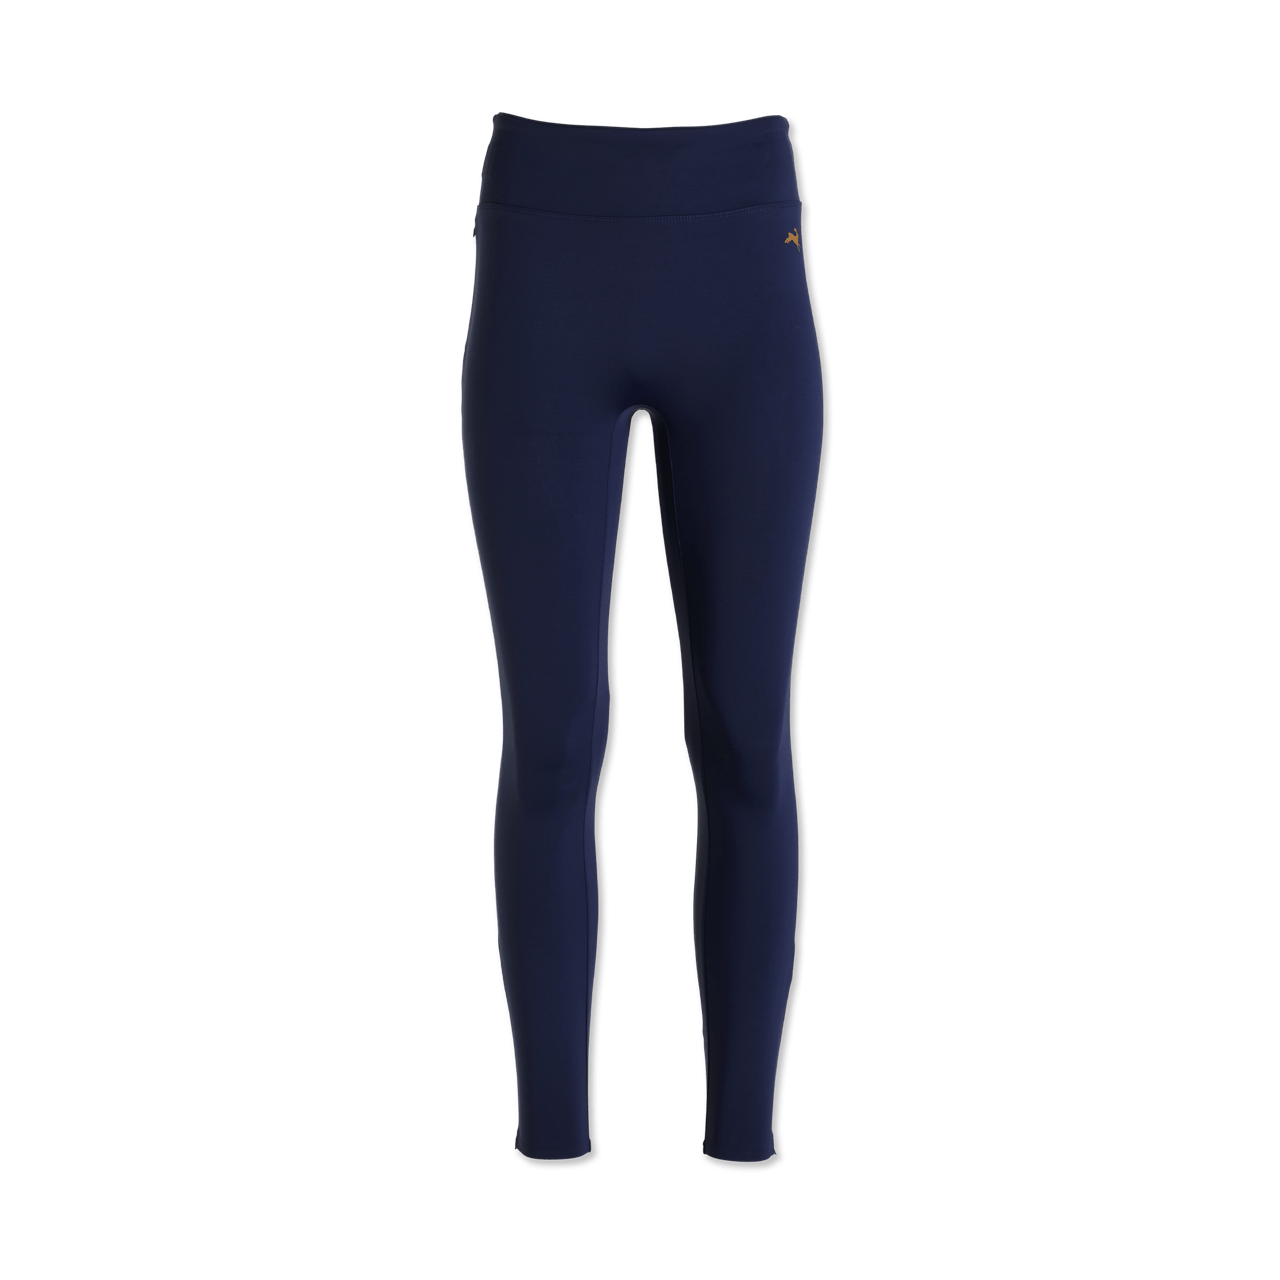 Tracksmith, Pants & Jumpsuits, Tracksmith Womens Turnover Tights  Fulllength Running Leggings Blue Green Large